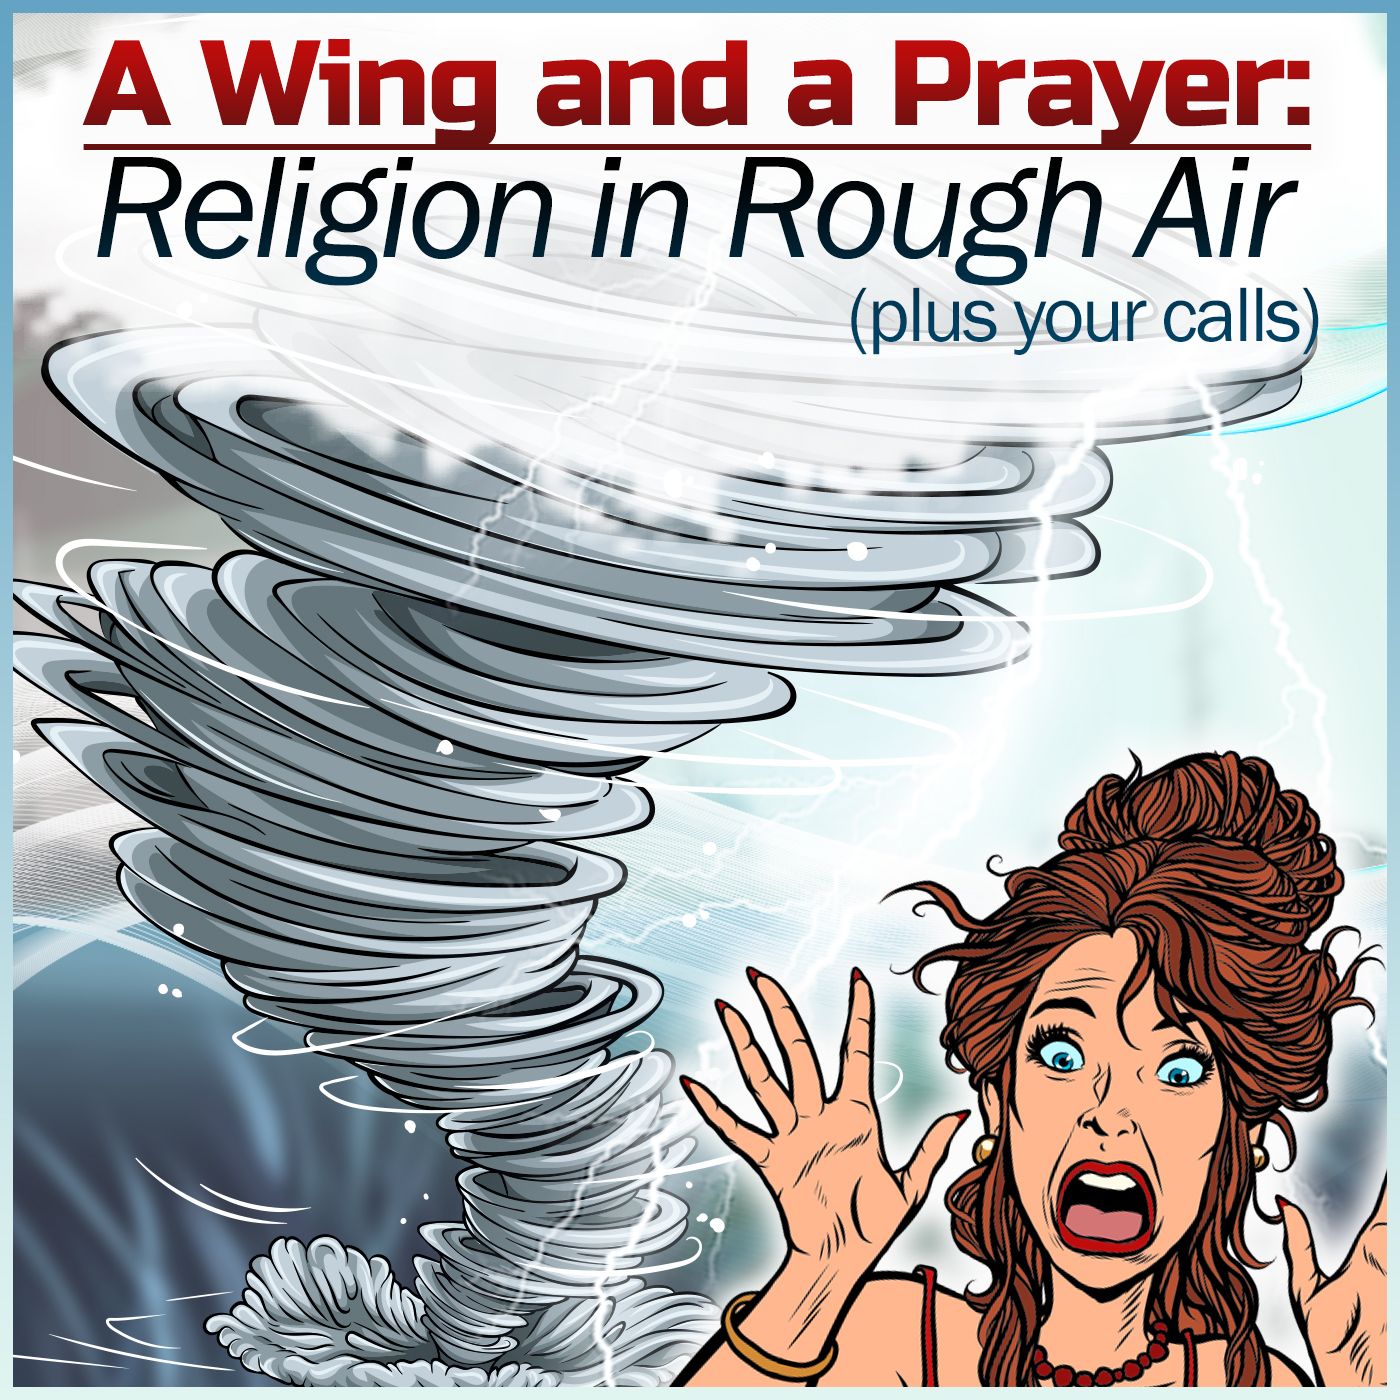 A Wing and a Prayer: Religion in Rough Air (plus your calls)